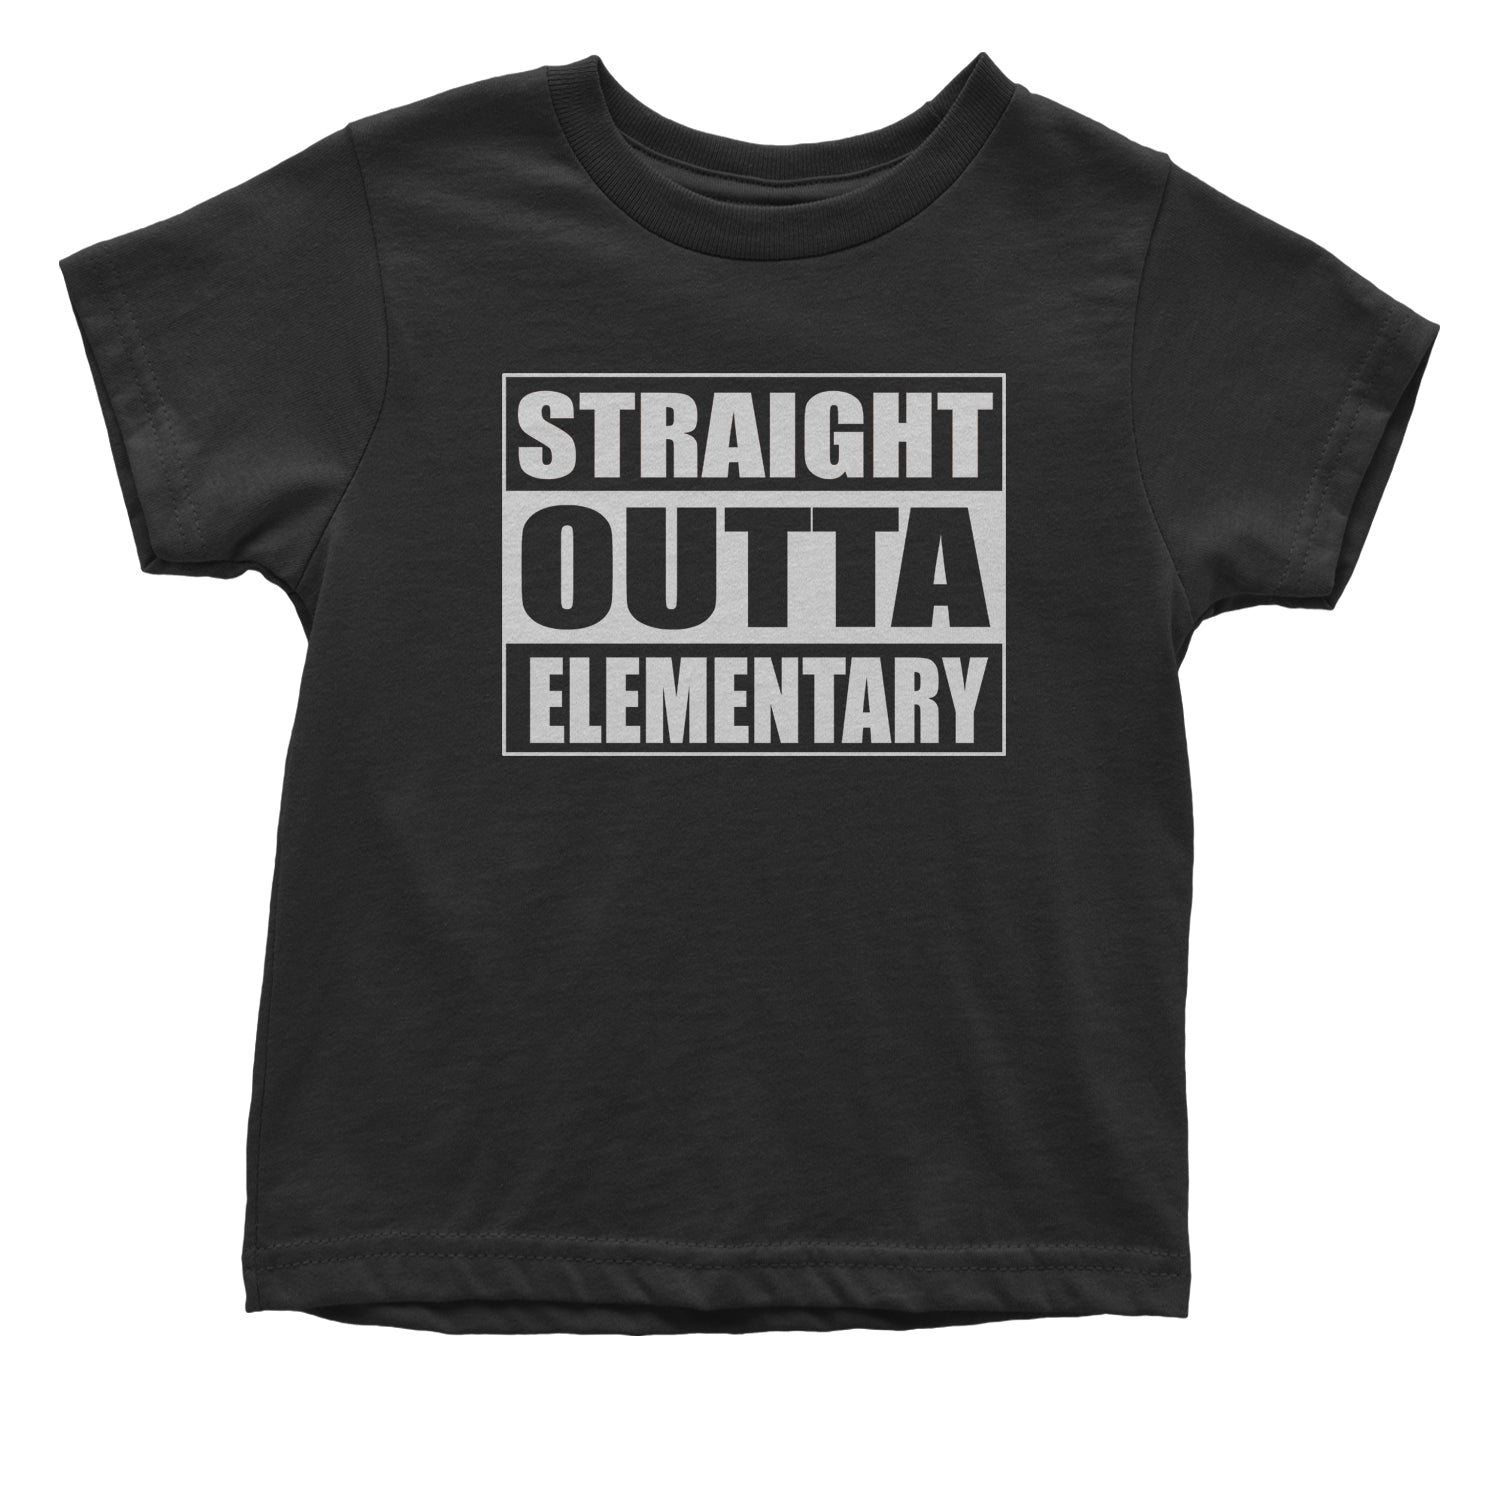 Straight Outta Elementary Toddler T-Shirt 2020, 2021, 2022, class, of, quarantine, queen by Expression Tees